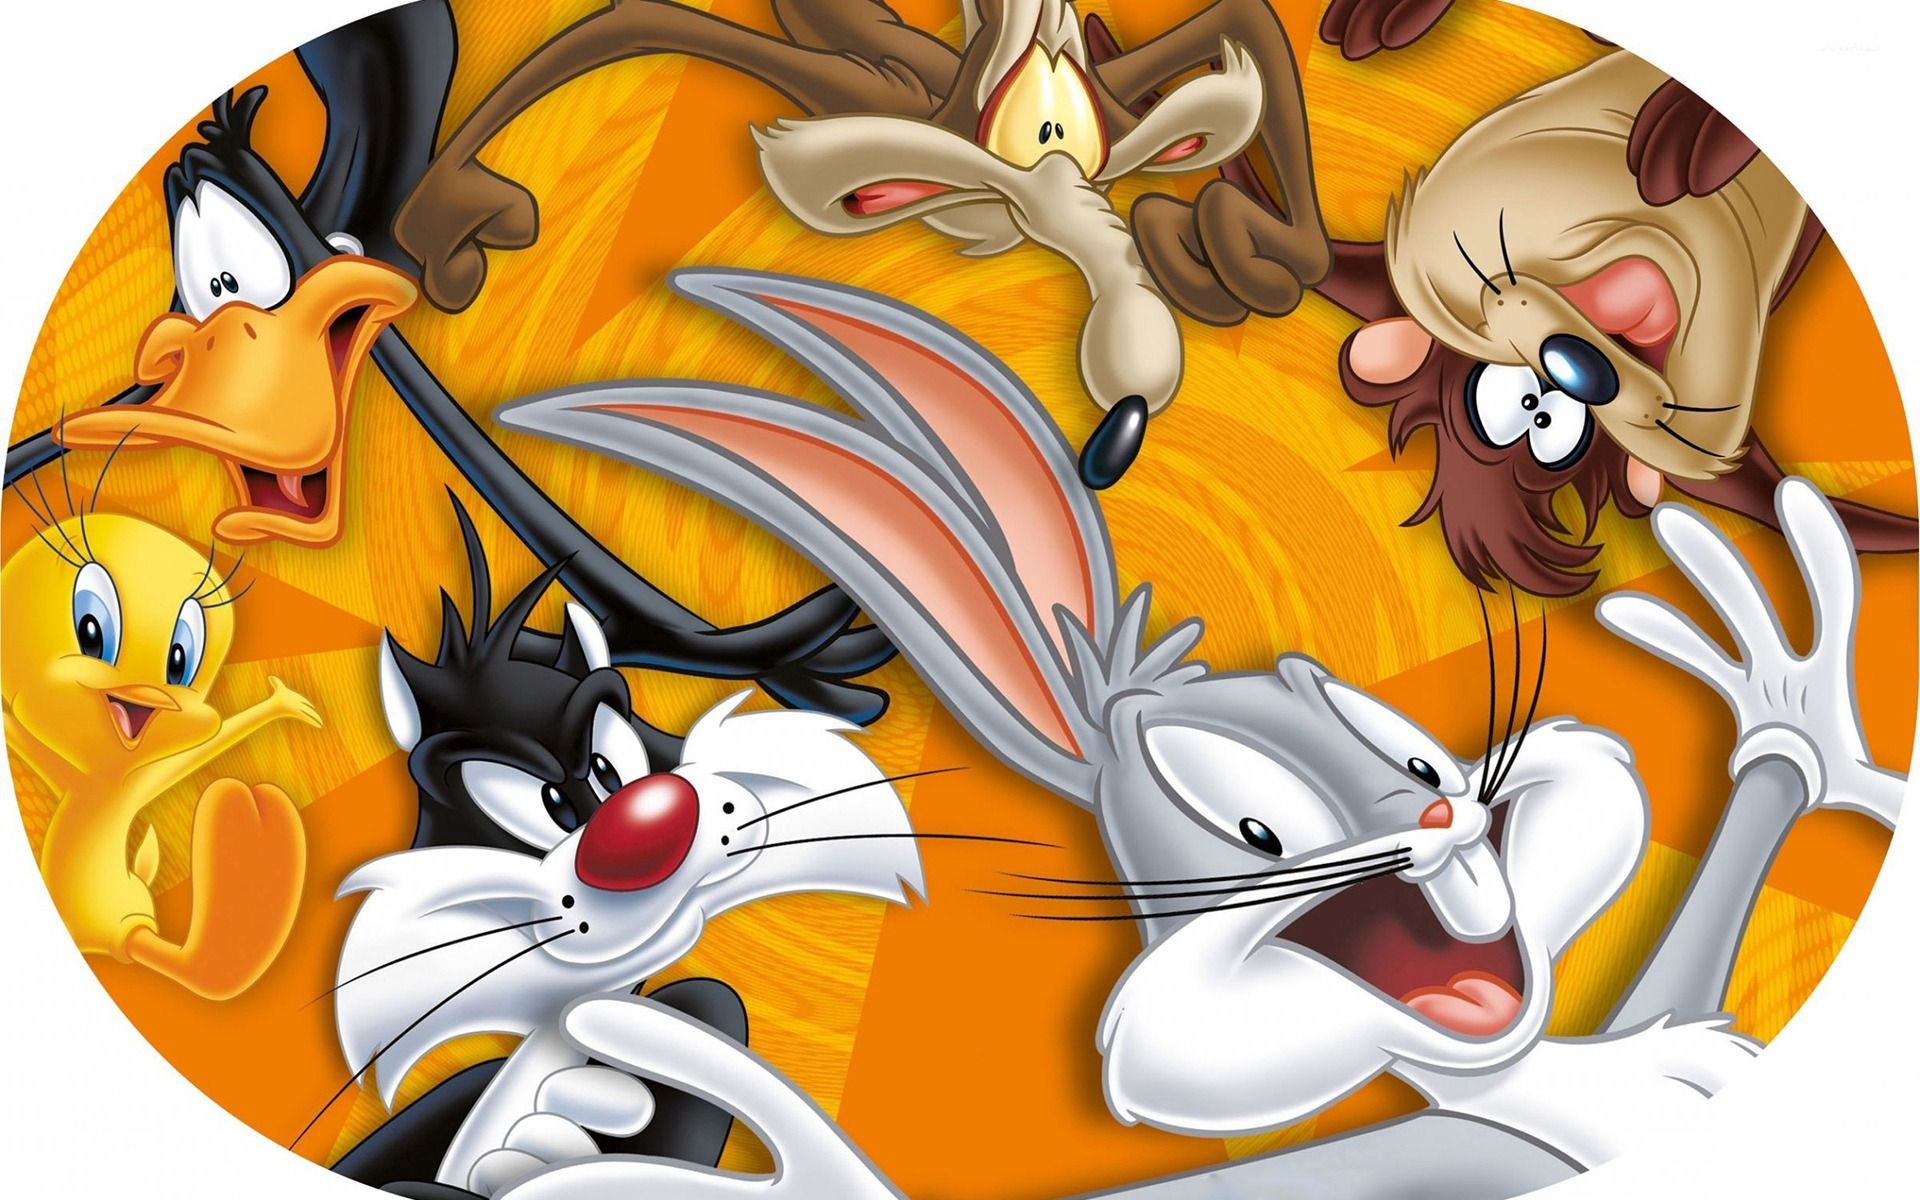 Sylvester the Cat, Baby Looney Tunes wallpapers, Adorable duo, Playful design, 1920x1200 HD Desktop